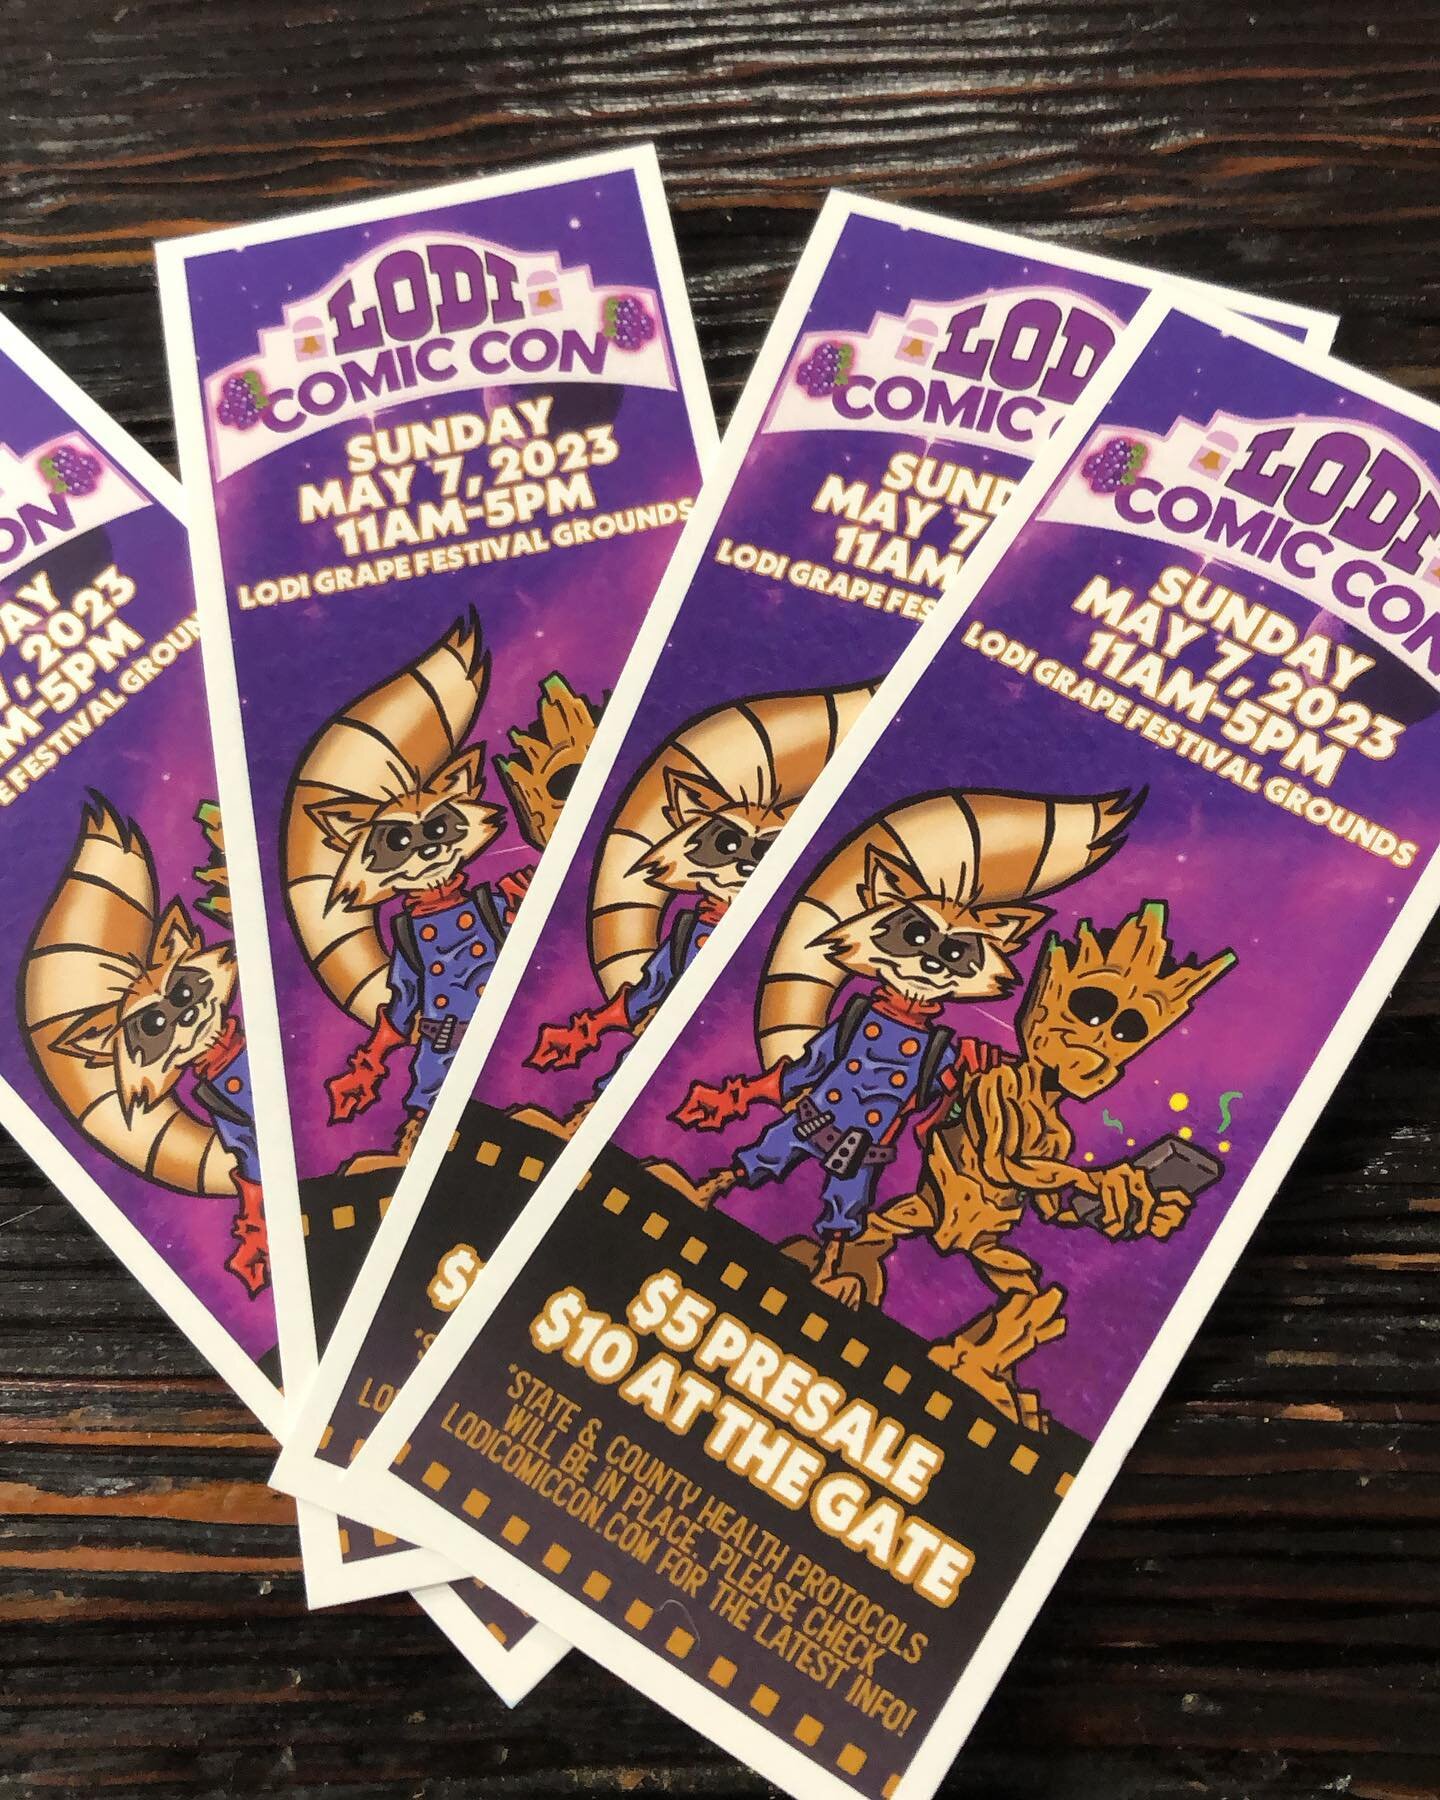 Lodi Comic Con is this Sunday May 7th and we have some tickets to give away! Post here and we will pick two winners, 2 tickets each, tomorrow morning. ^Ben #sacramento #lodicomiccon @stocktoncon